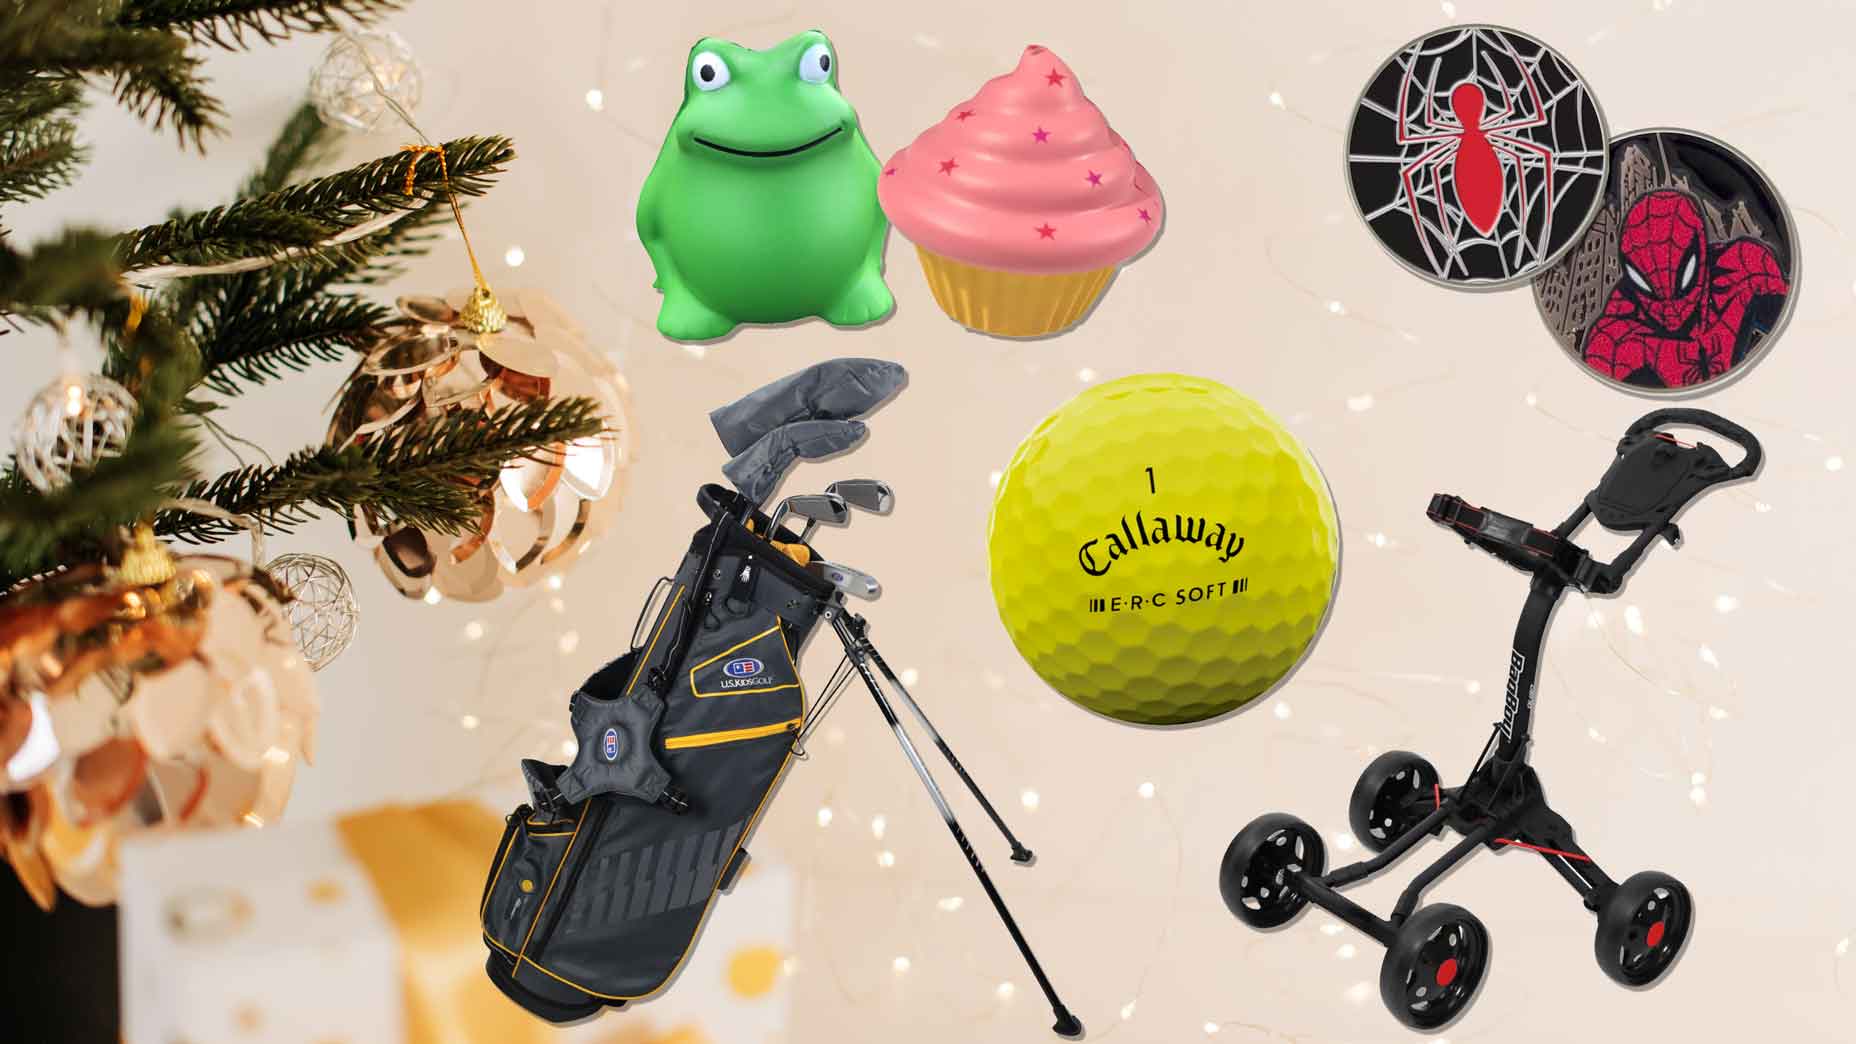 The best gifts for junior golfers, according to the top junior